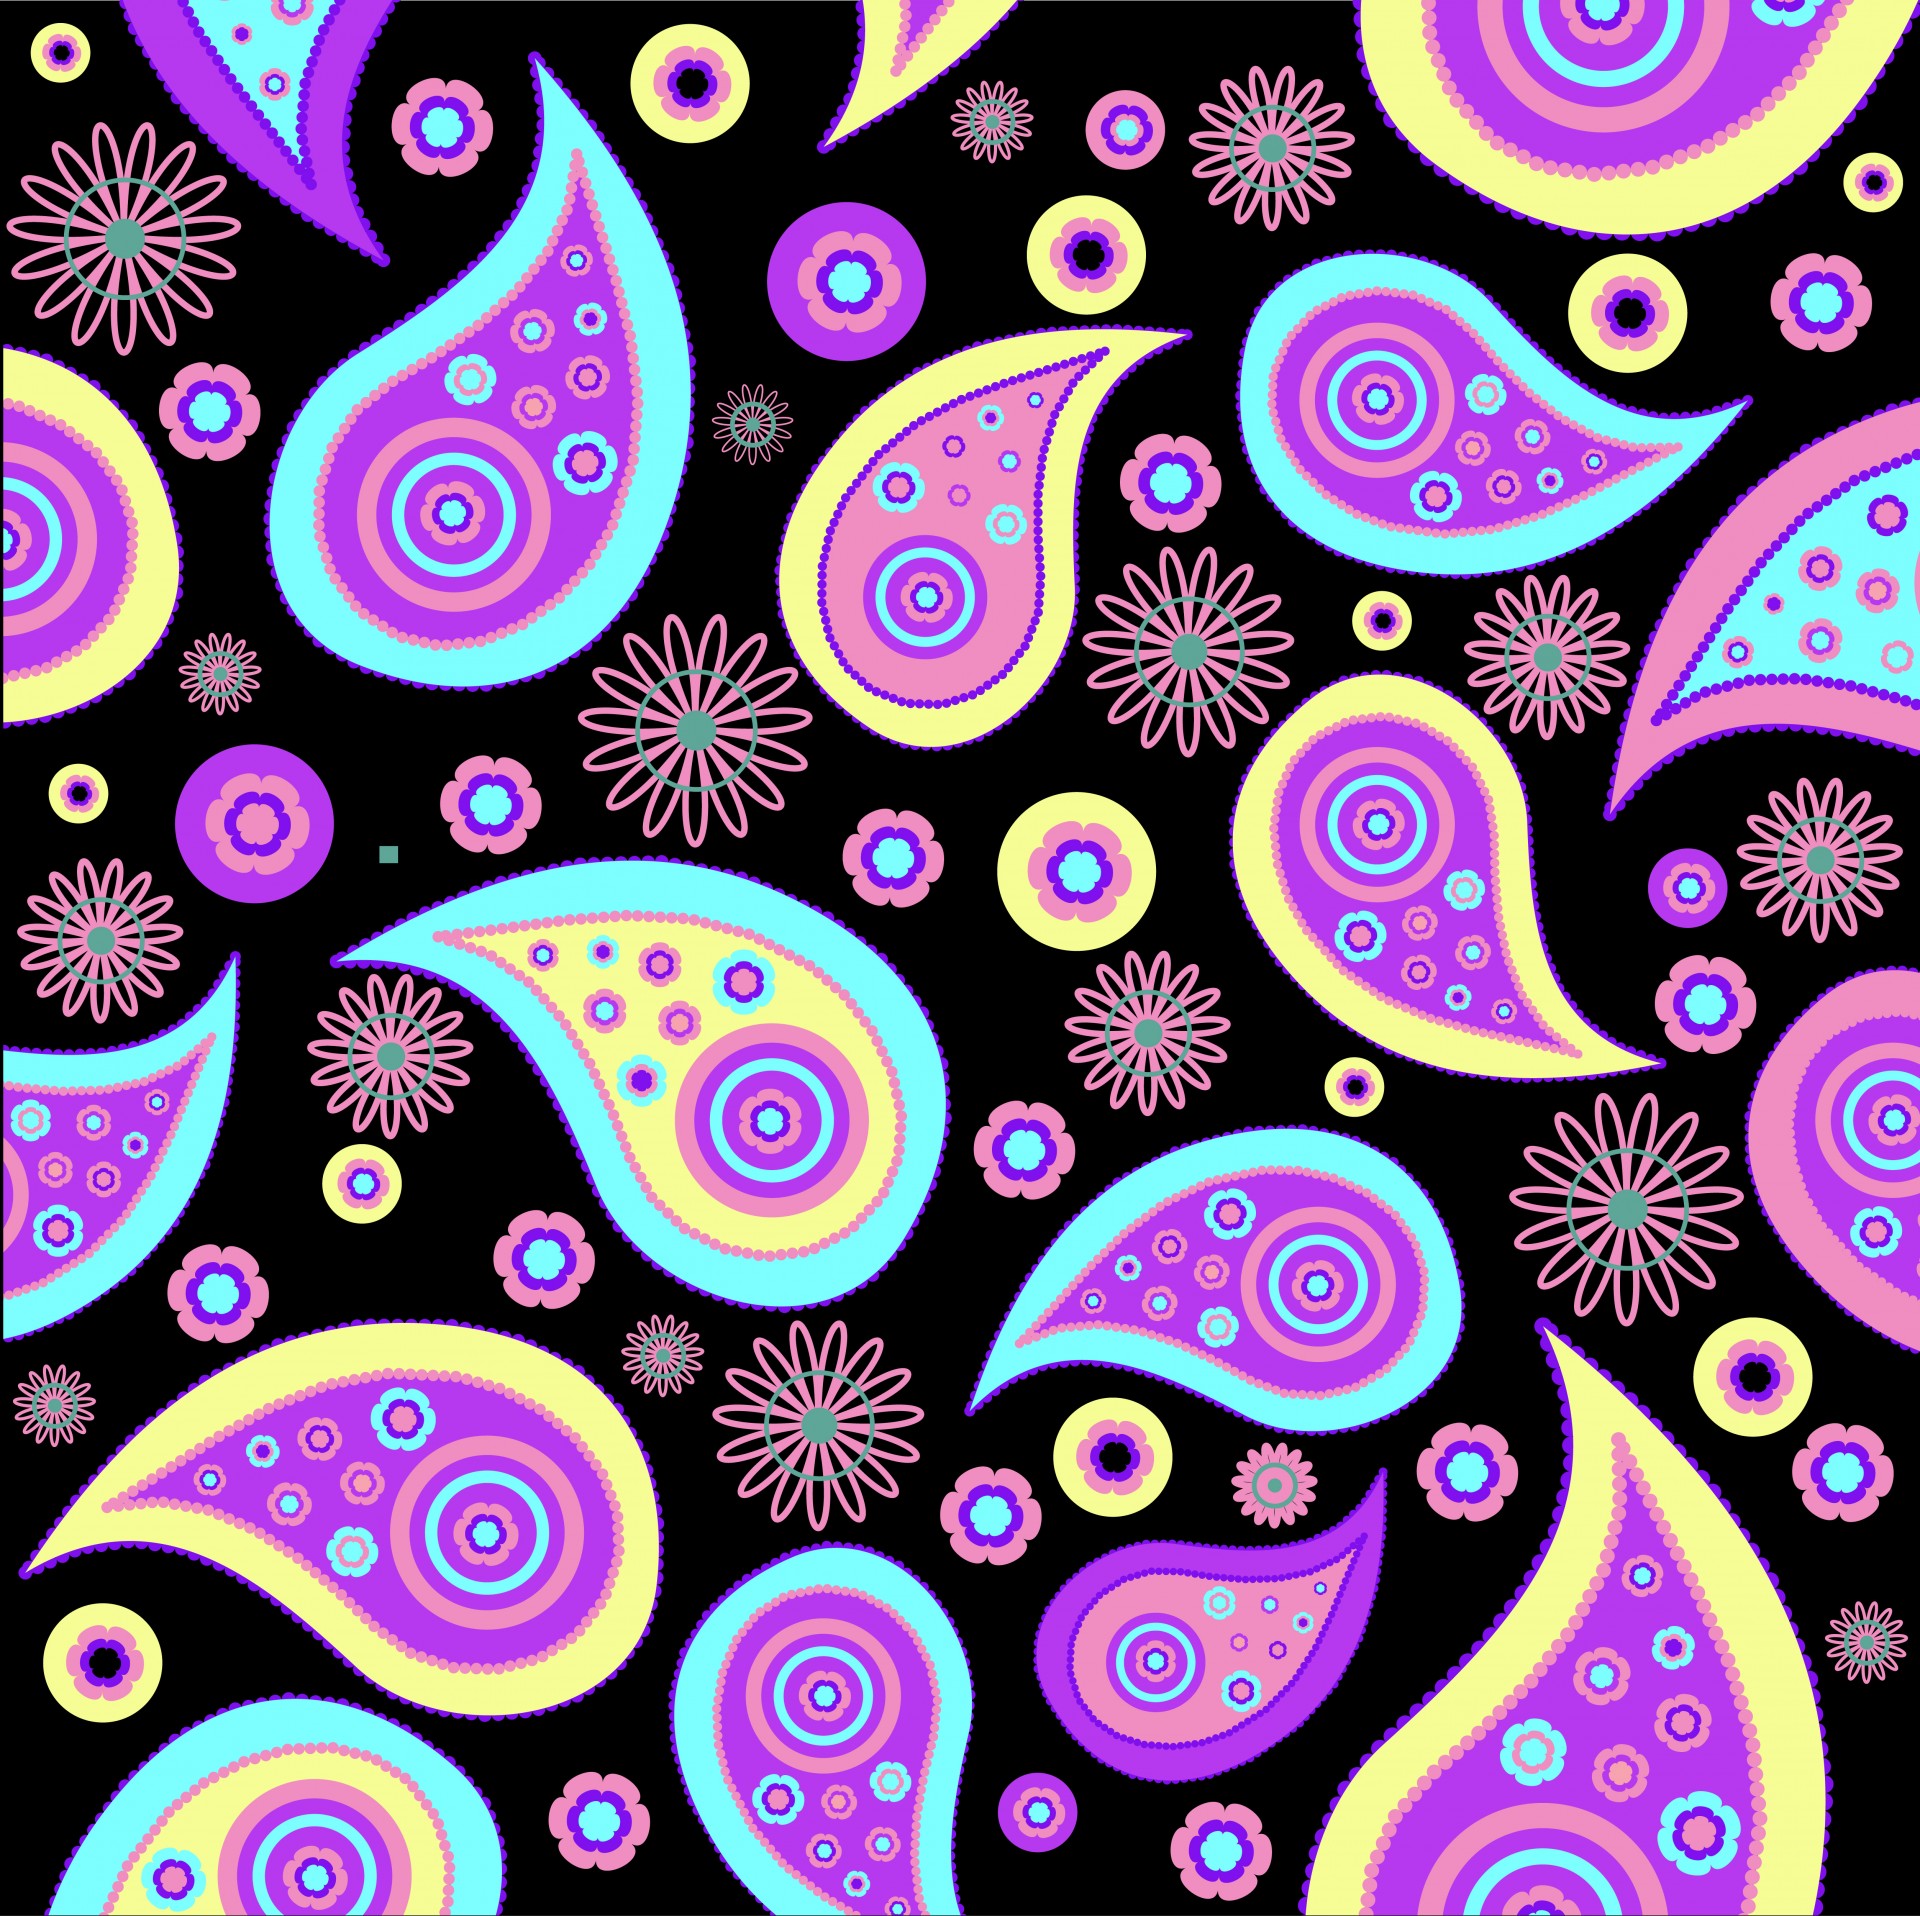 Bright colorful paisley pattern wallpaper background